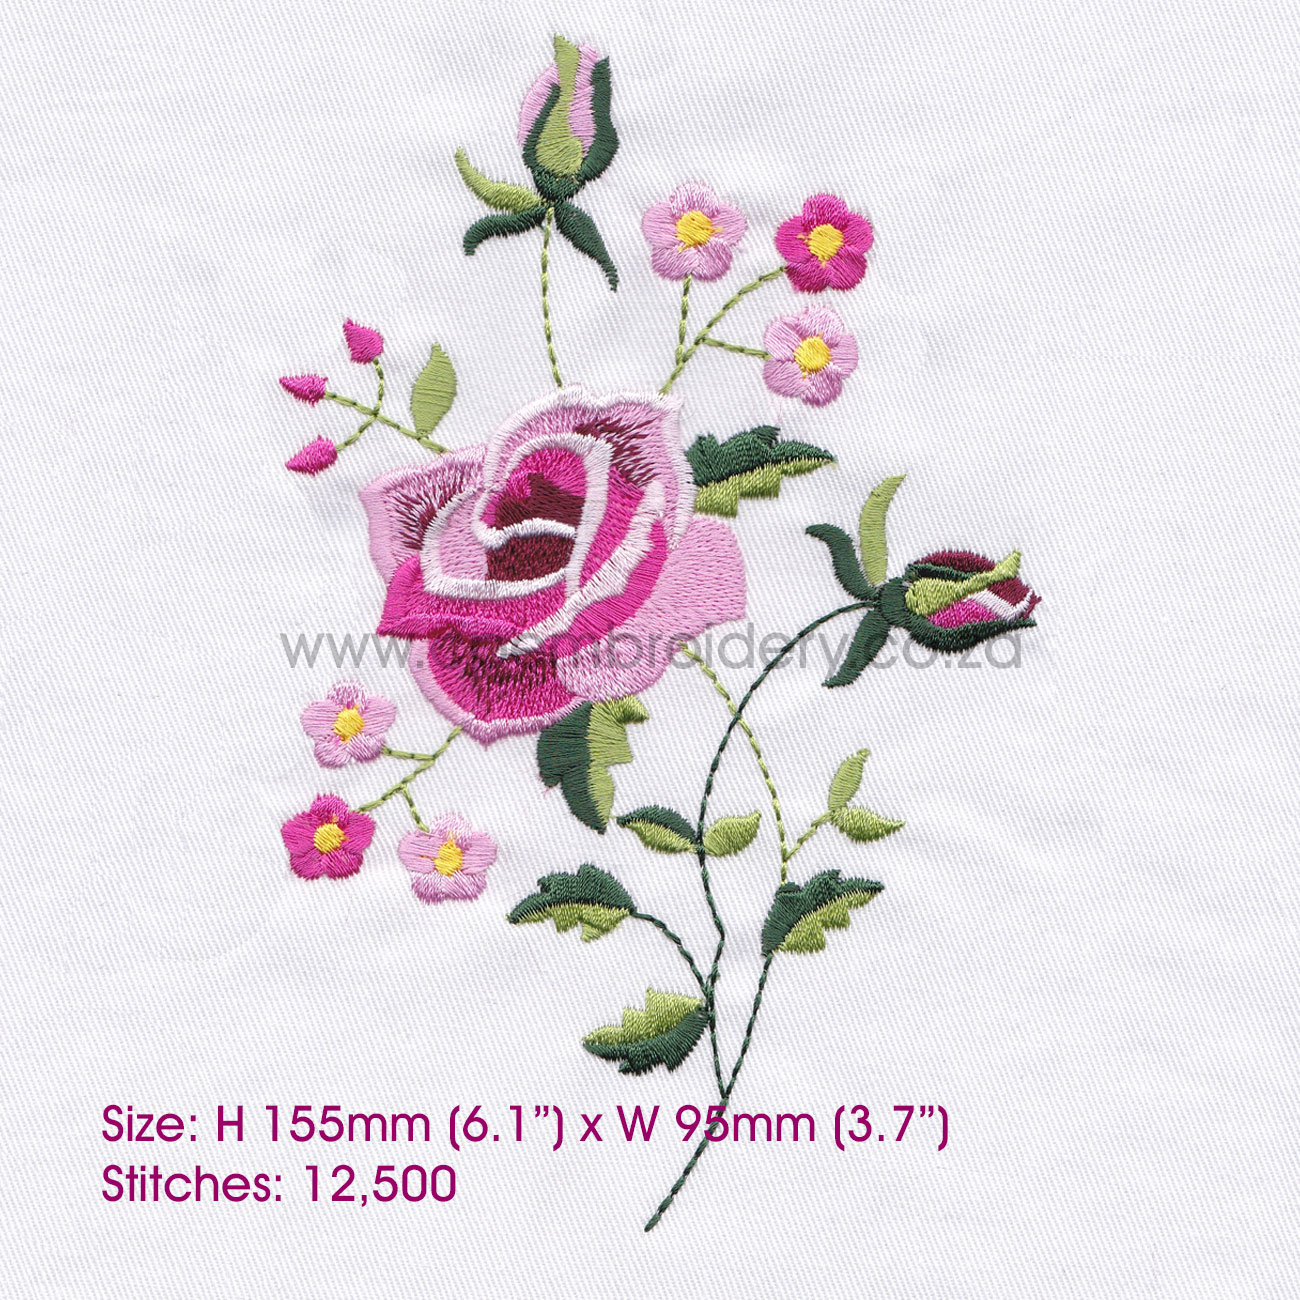 Rose Patterns For Embroidery Antique Single Rose Design